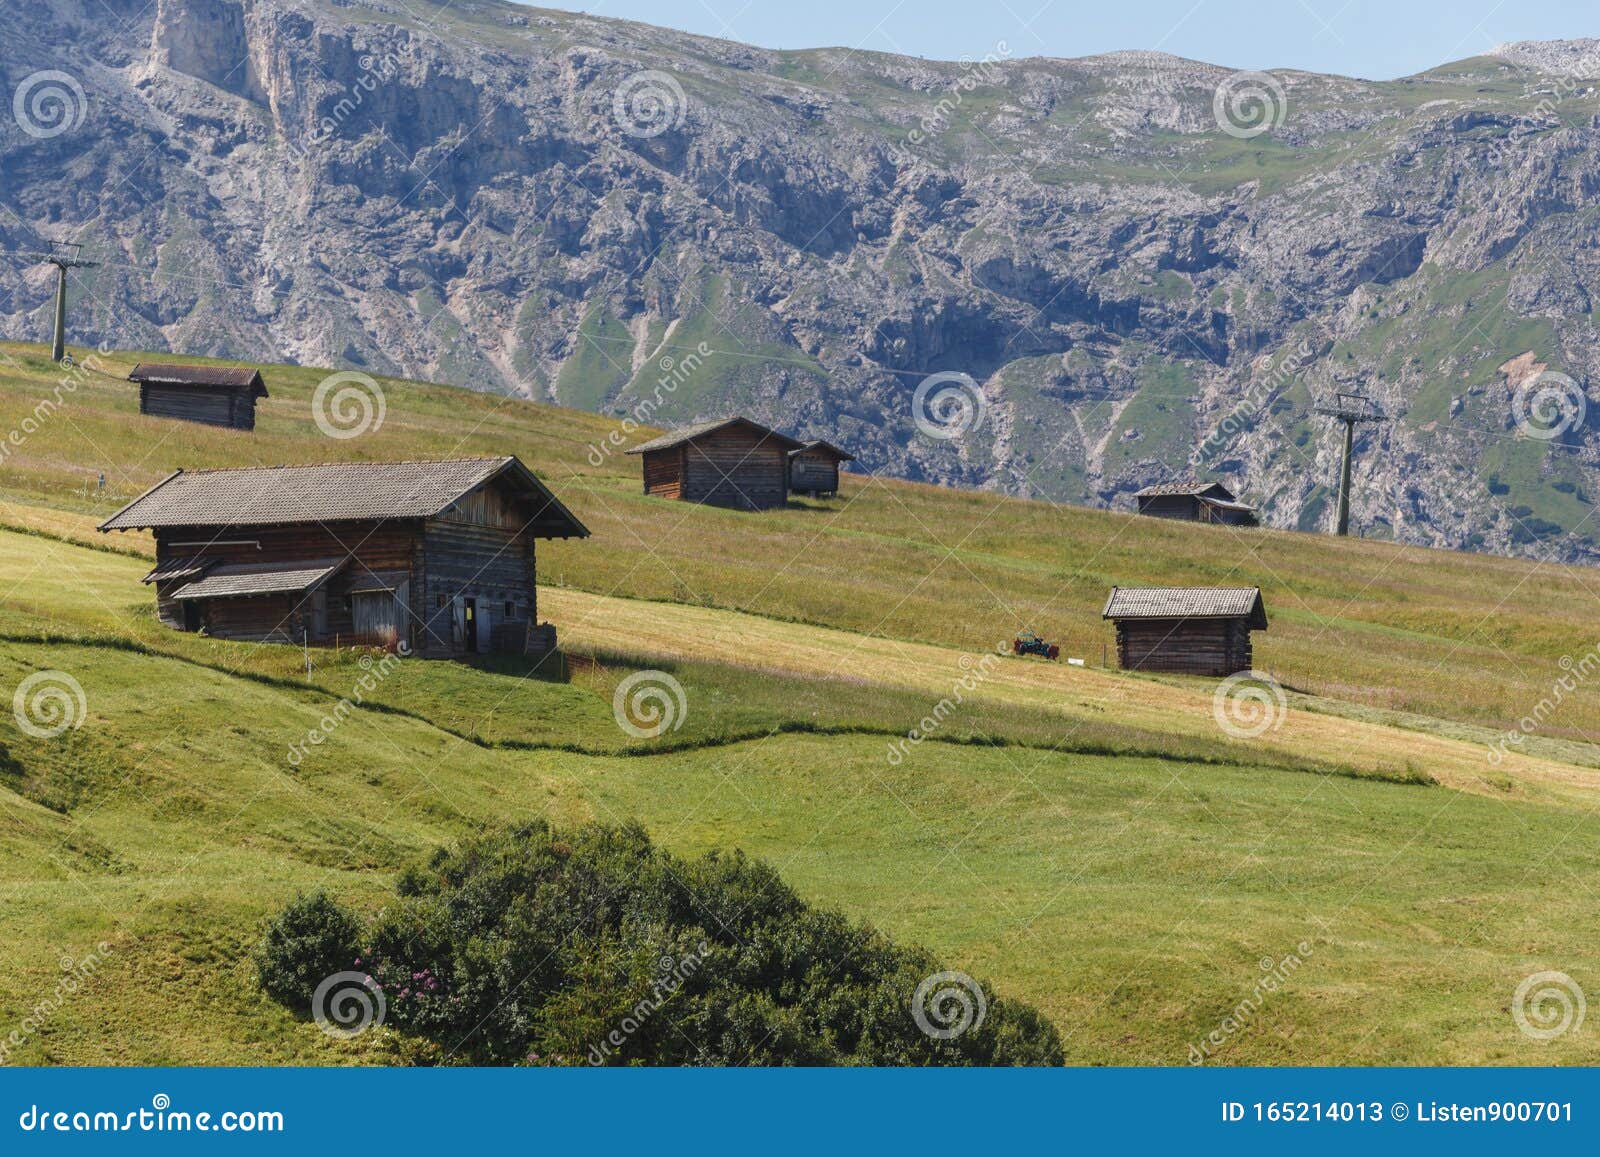 Alpine meadow in Italy | Royalty free photo - 1230619